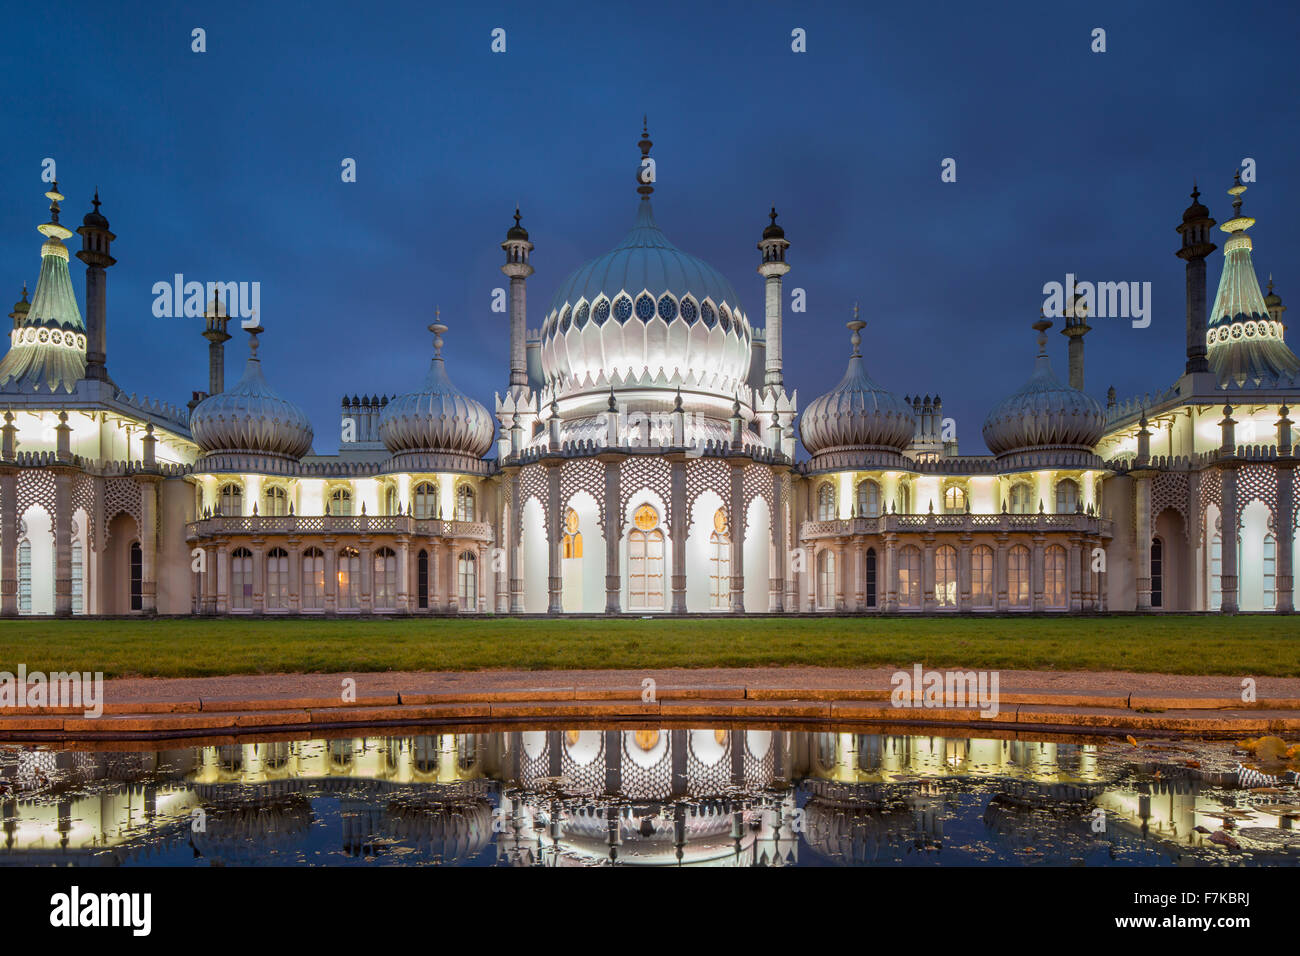 Evening at Royal Pavilion in Brighton, East Sussex, England. Stock Photo